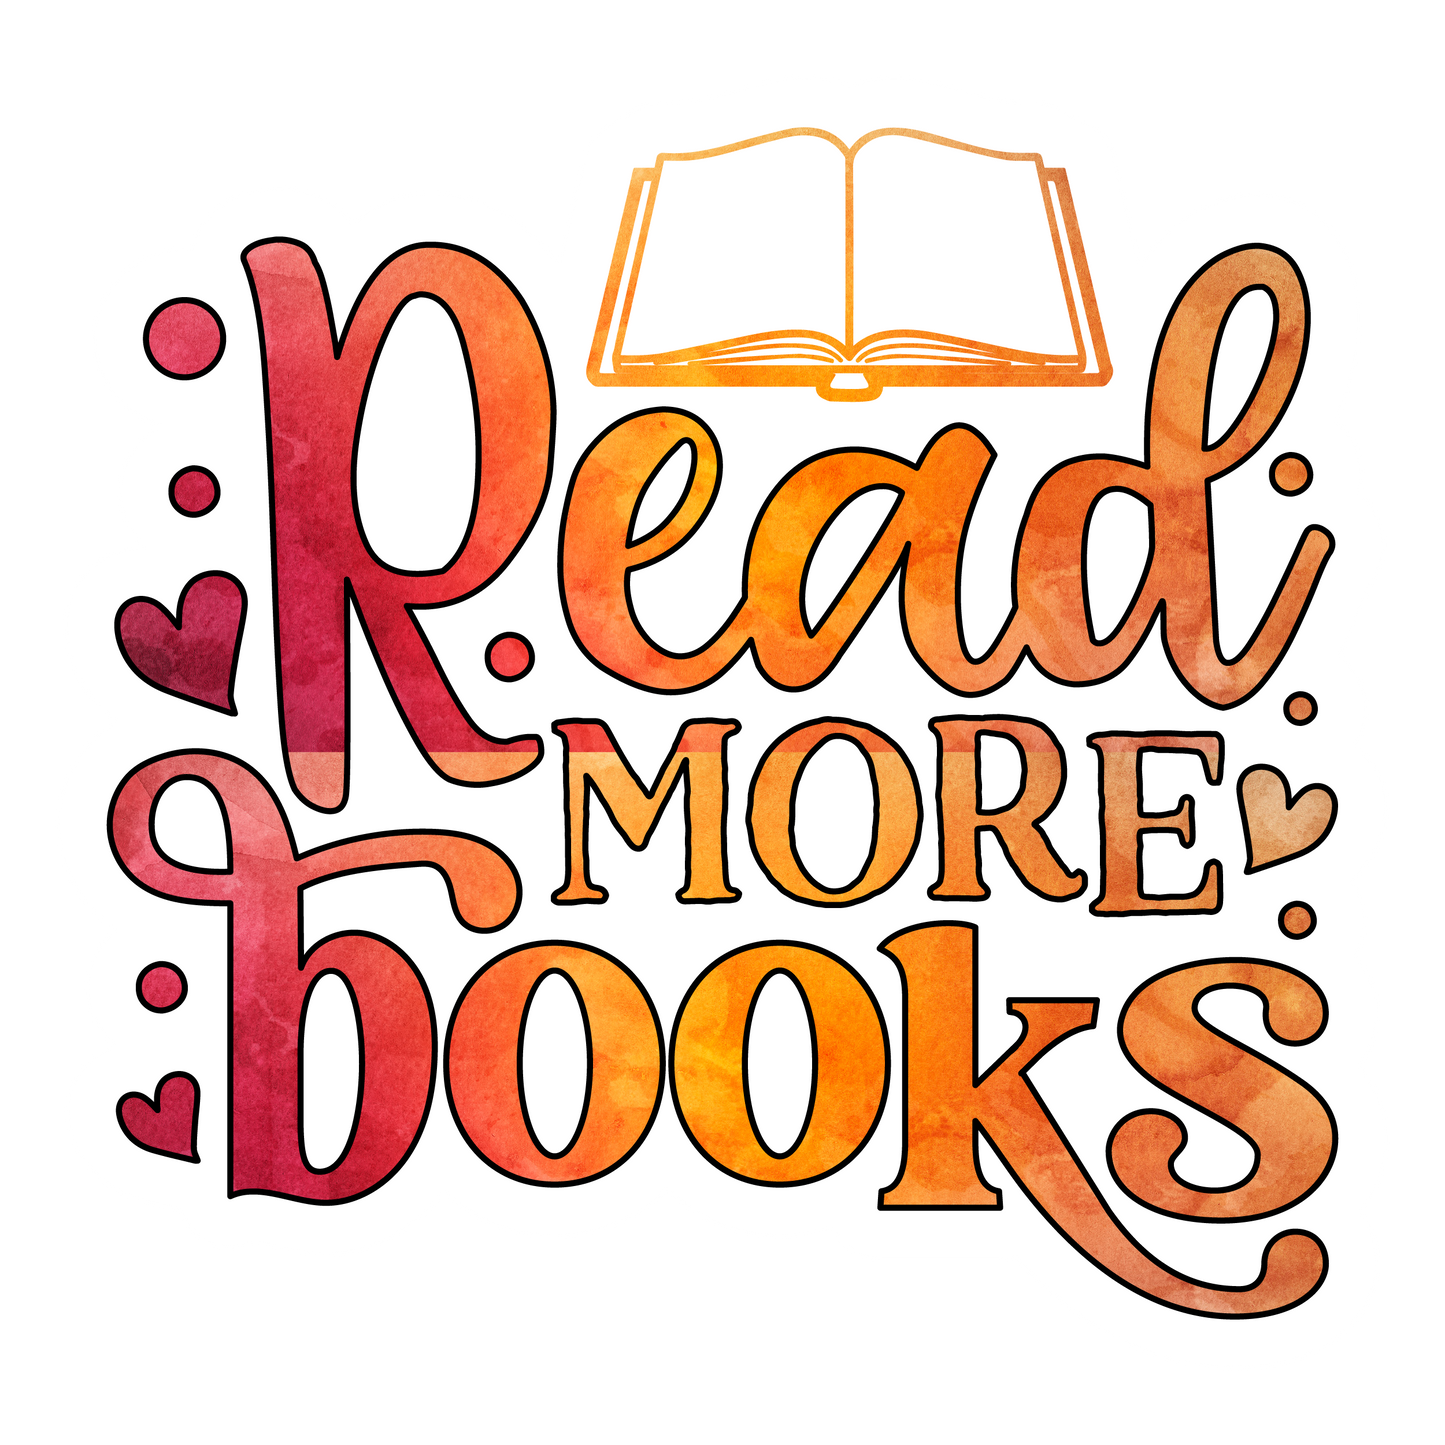 Stickers - Read More Books Sticker, Book Lovers' Stickers